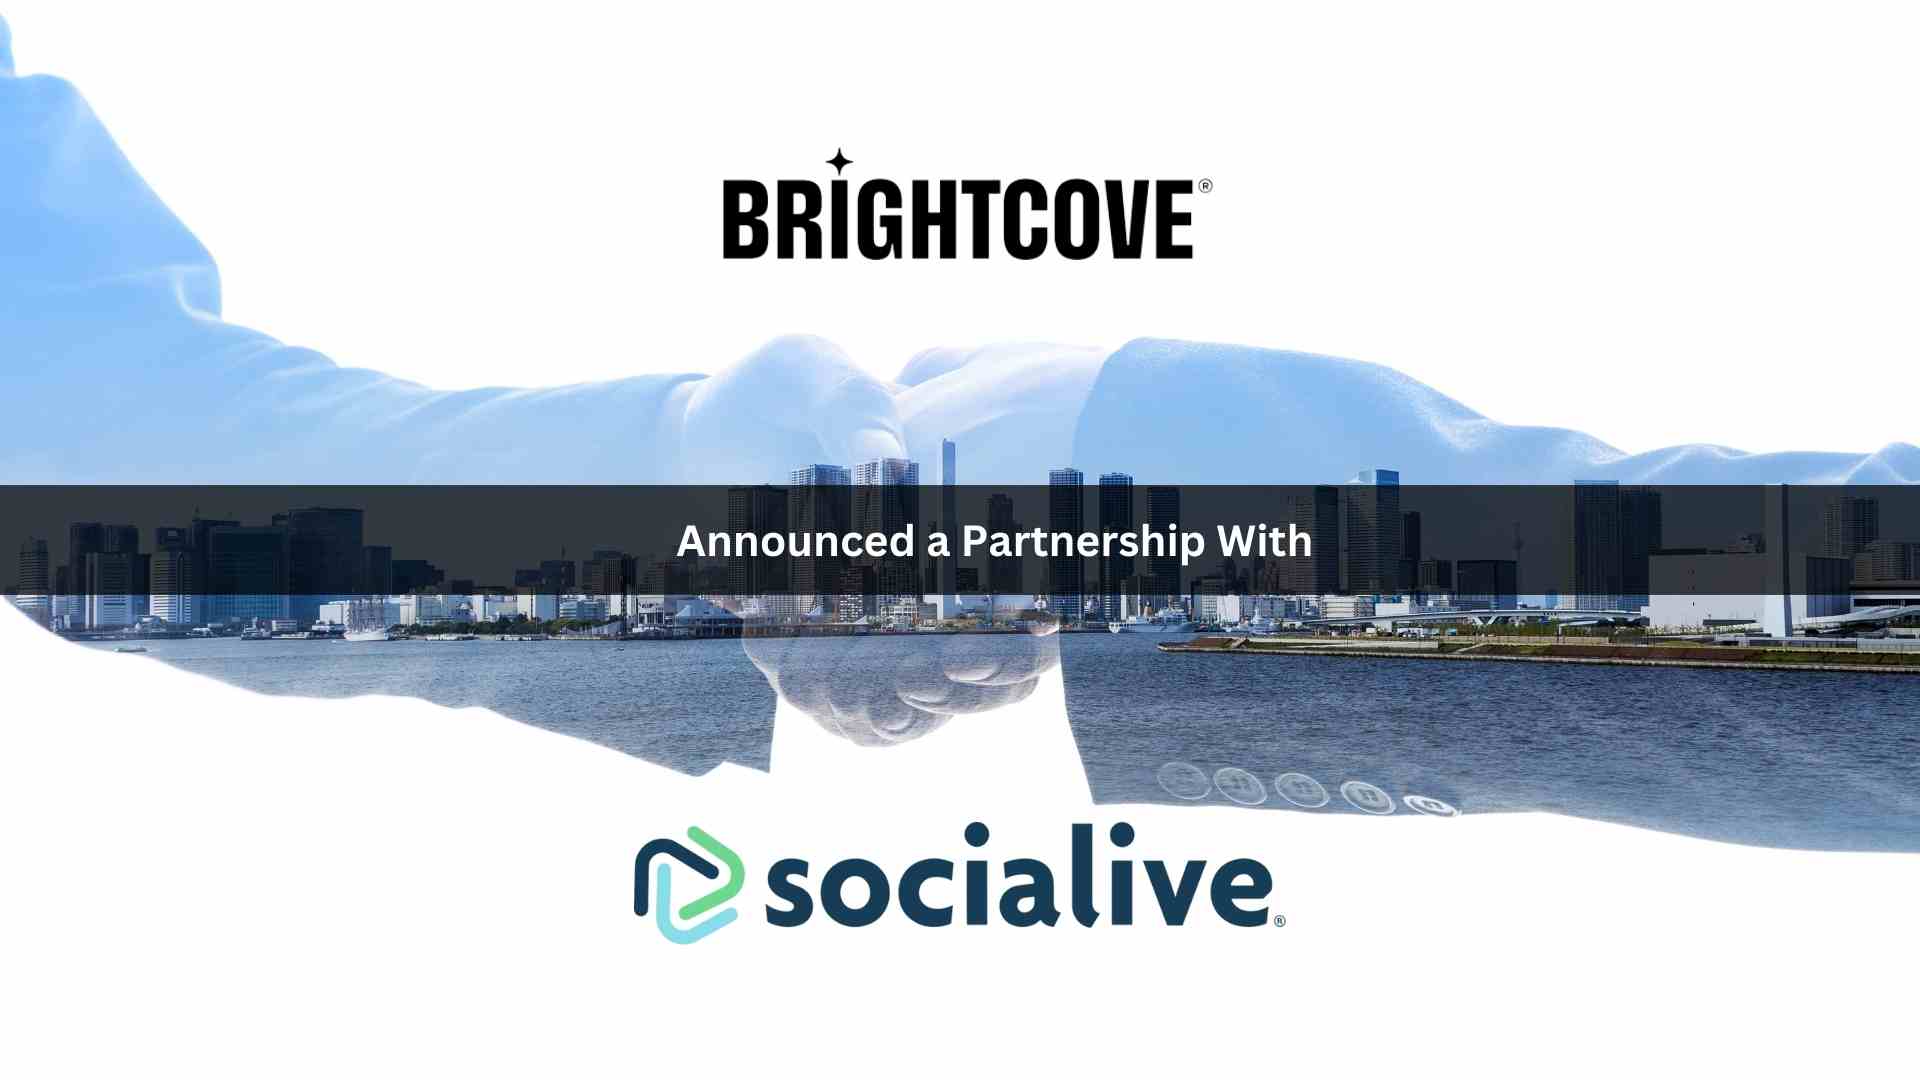 Brightcove and Socialive Partner to Enhance Livestream Management Offerings for Internal Communications